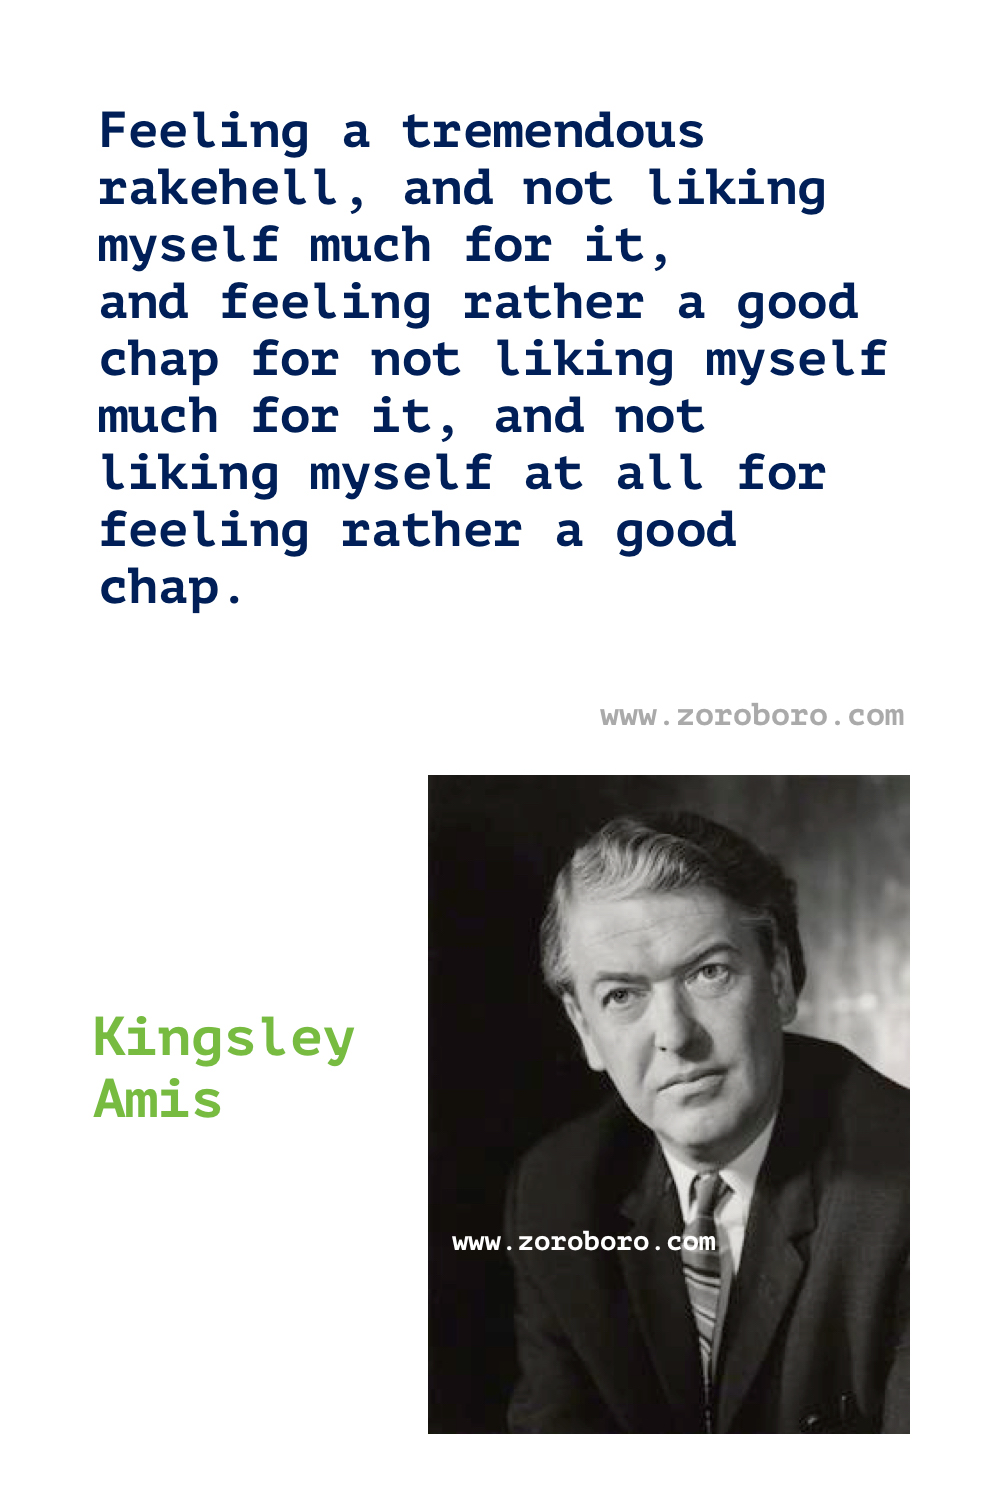 Kingsley Amis Quotes. Kingsley Amis (Author of Lucky Jim). Kingsley Amis Books Quotes. Kingsley Amis Quotes.